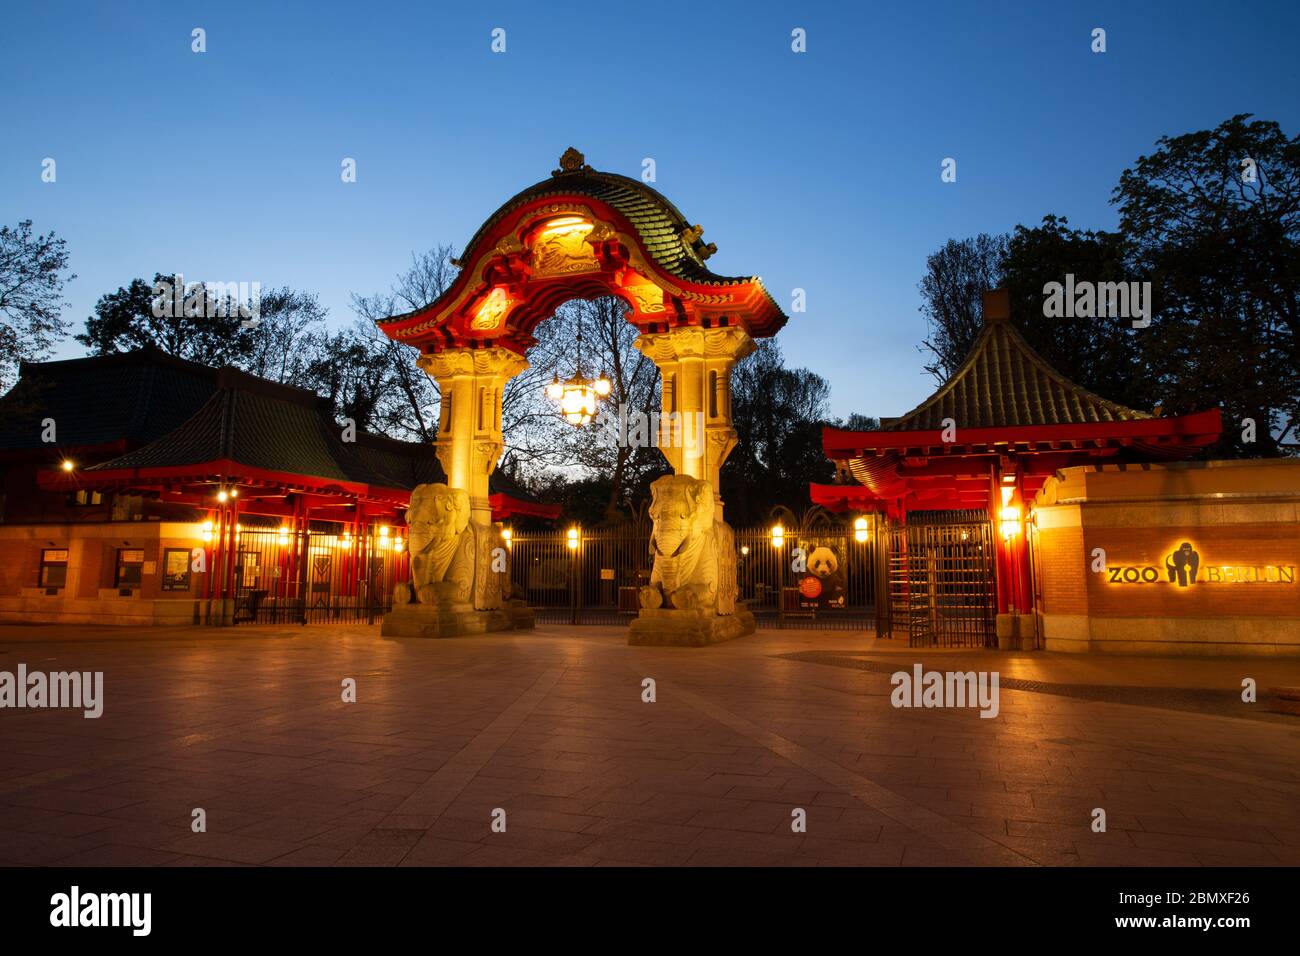 Berlin, Germany. 23rd Apr, 2020. The Elephant Gate at the entrance of Budapester Straße to the Berlin Zoo in the Blue Hour. Credit: Gerald Matzka/dpa-Zentralbild/ZB/dpa/Alamy Live News Stock Photo